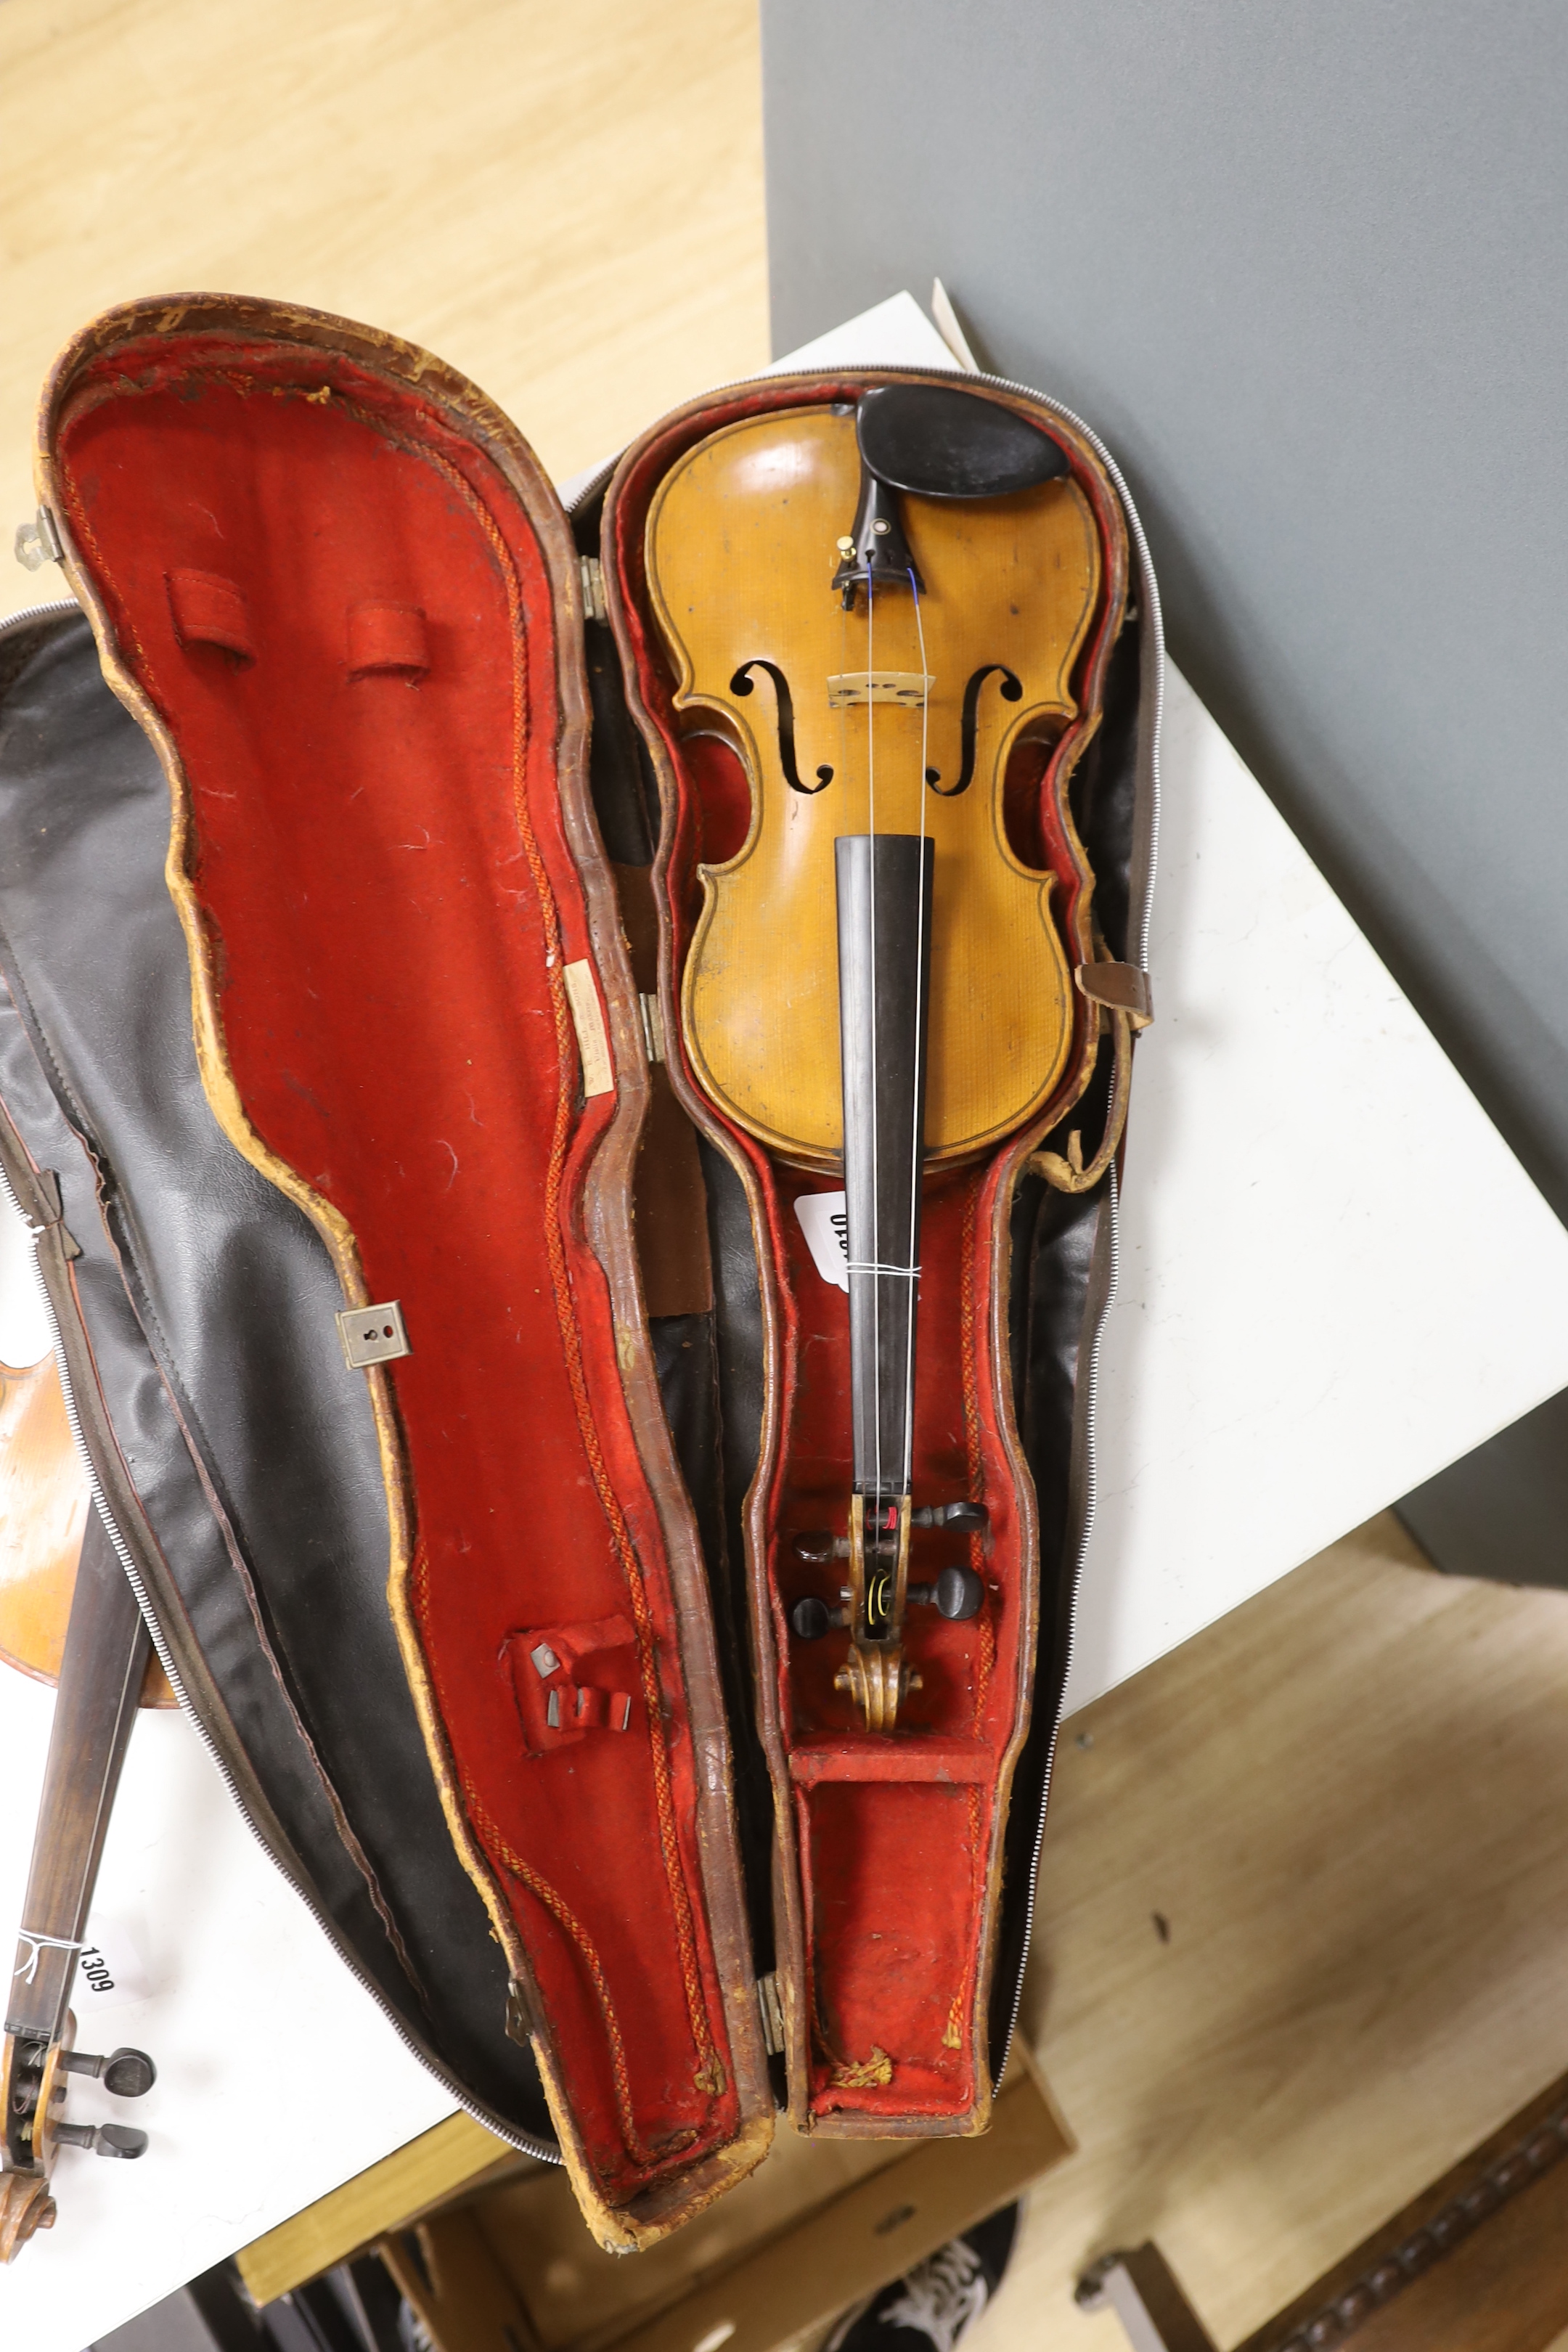 A cased early twentieth century violin by Rudolph Raymond, with maker’s label inside the body stating ‘made 1904’, body 36cm, in a good case with a label for W.E. Hills & Sons, Violin Makers, 140 New Bond St. London